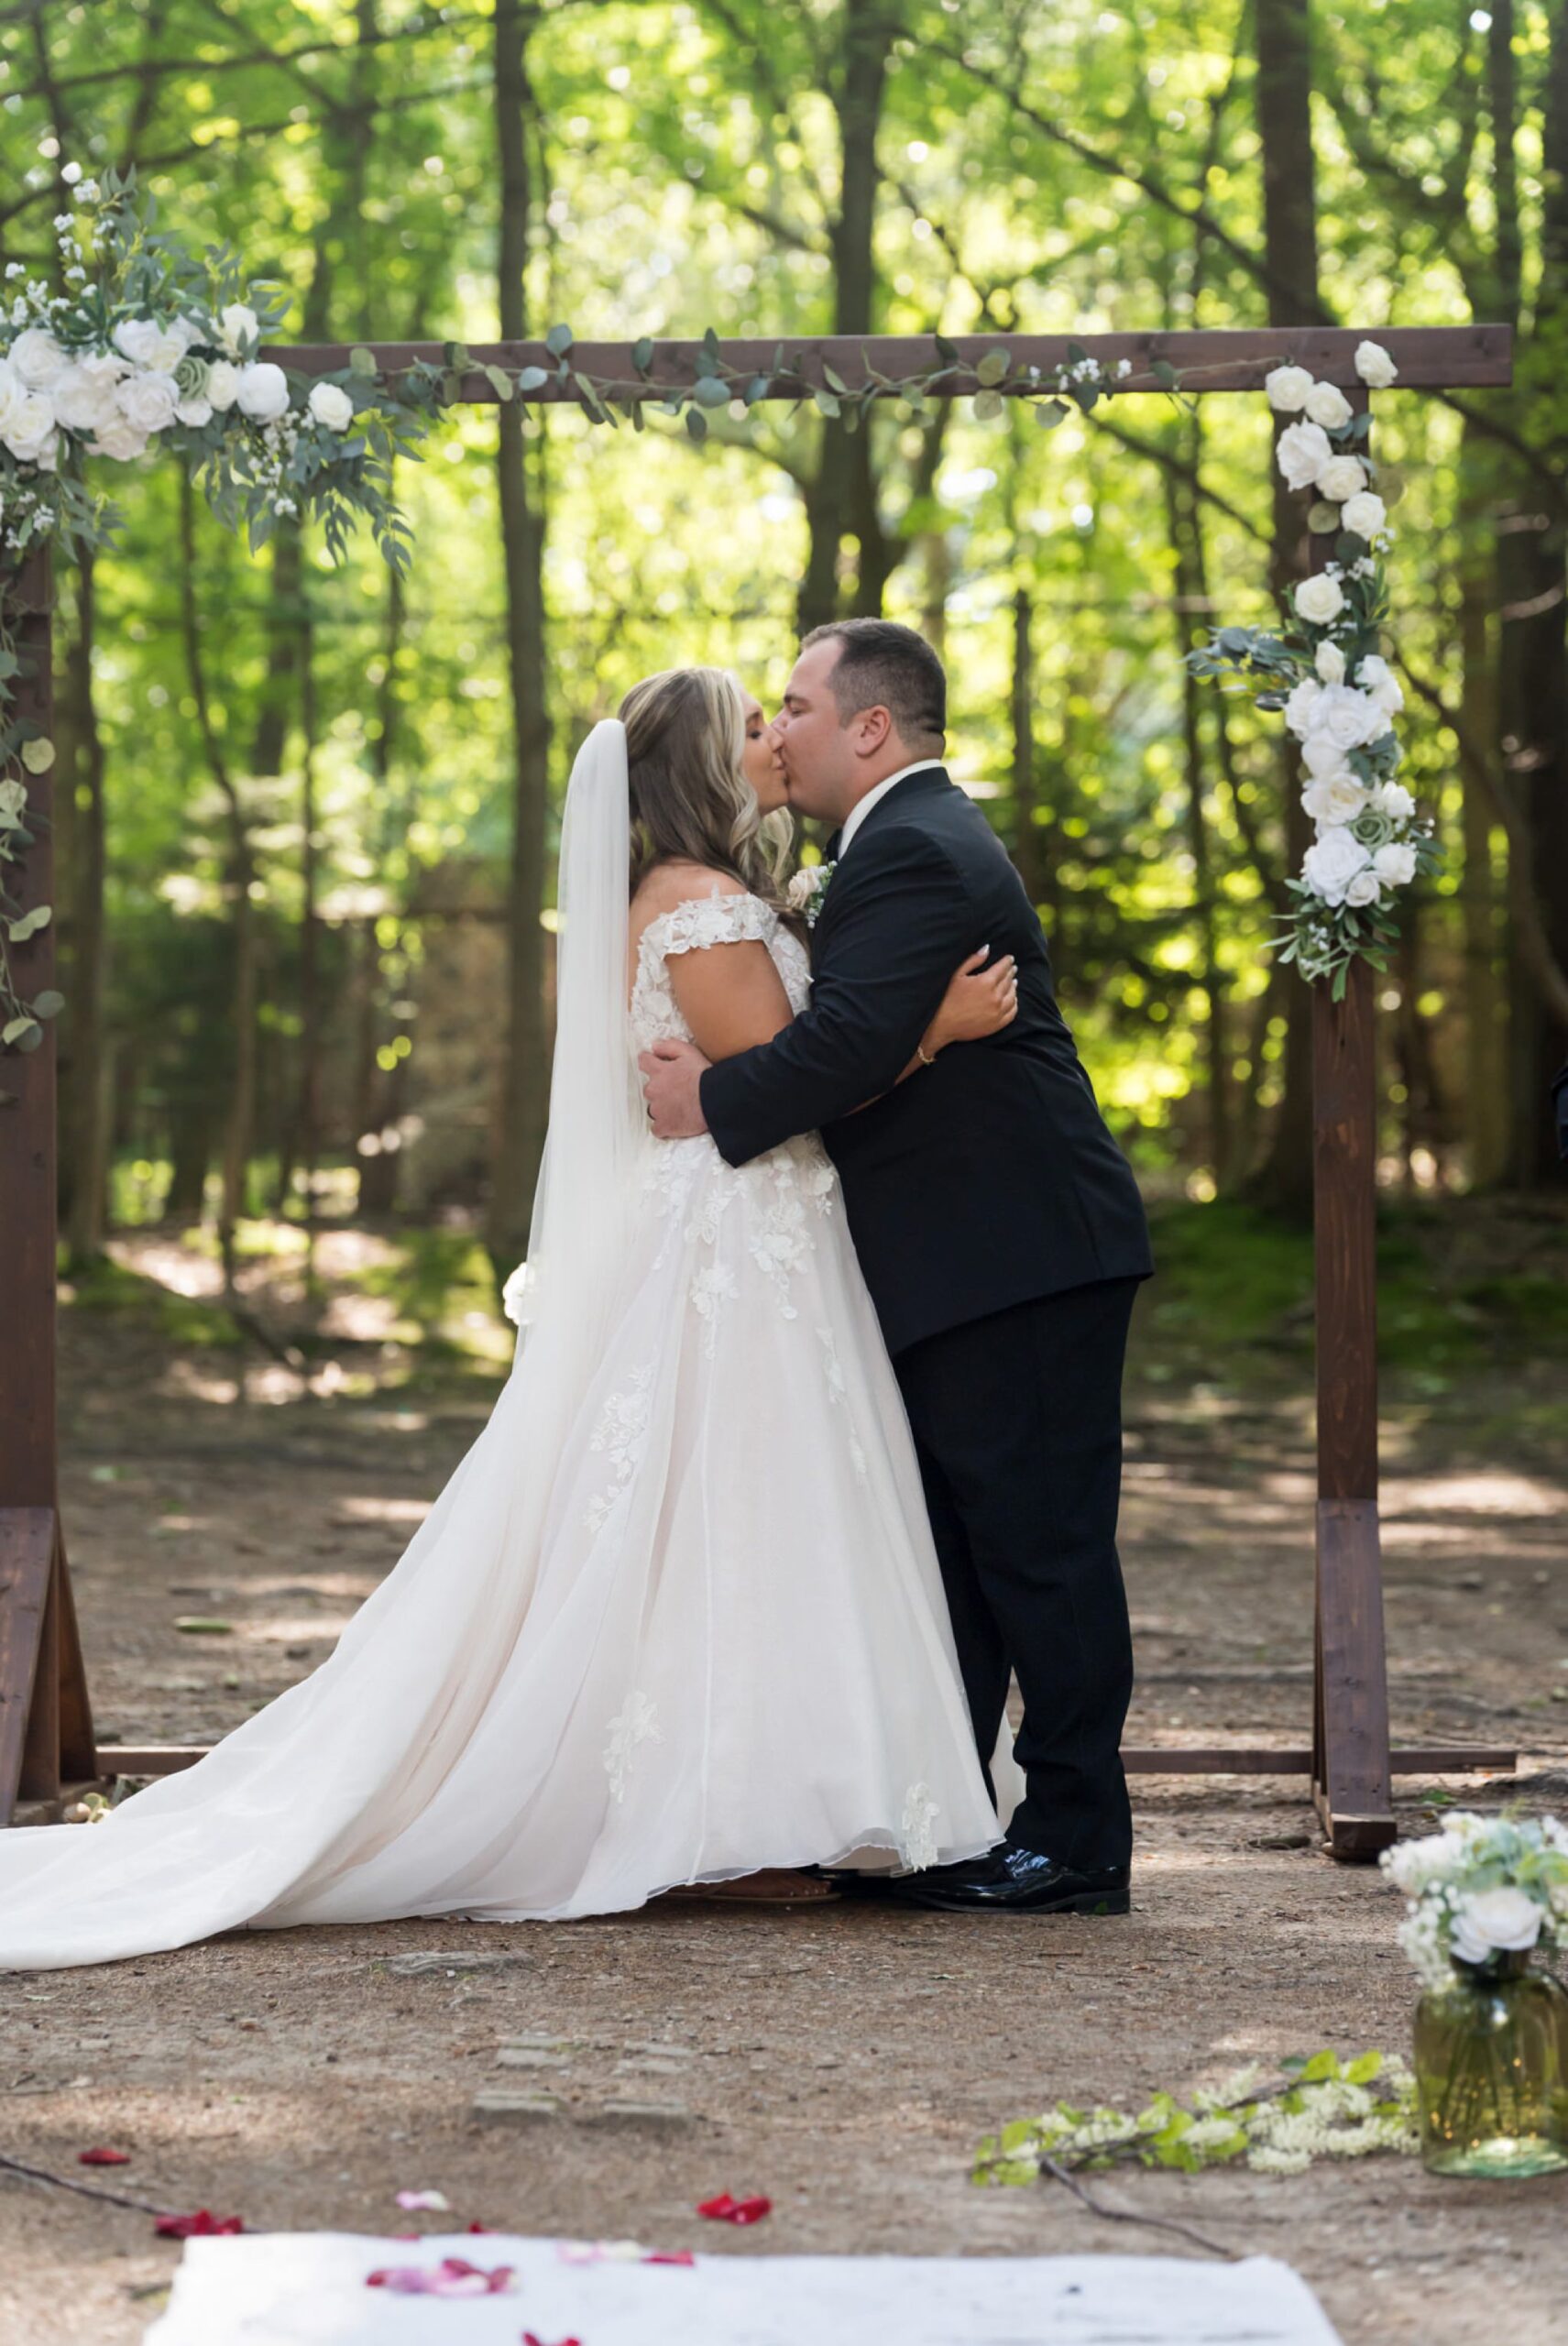 The bride and groom kiss at their Stony Creek wedding in The Pines.  